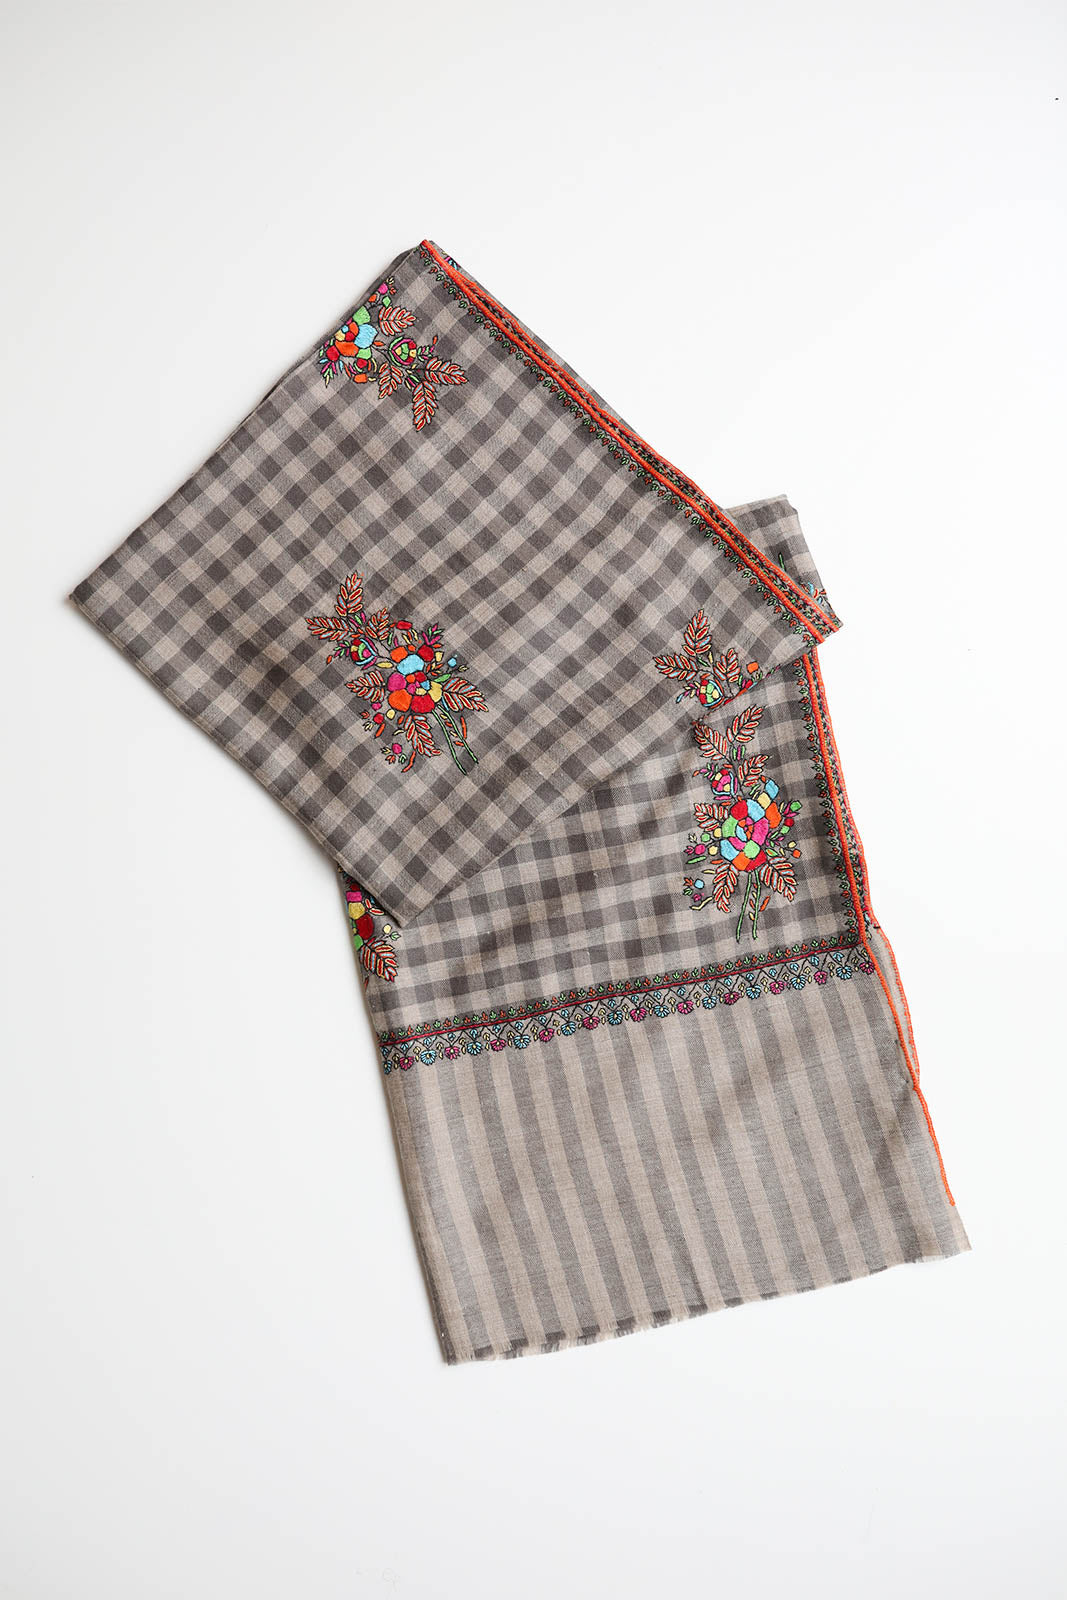 Schal Pashmina 1 in Grey Check Flowers